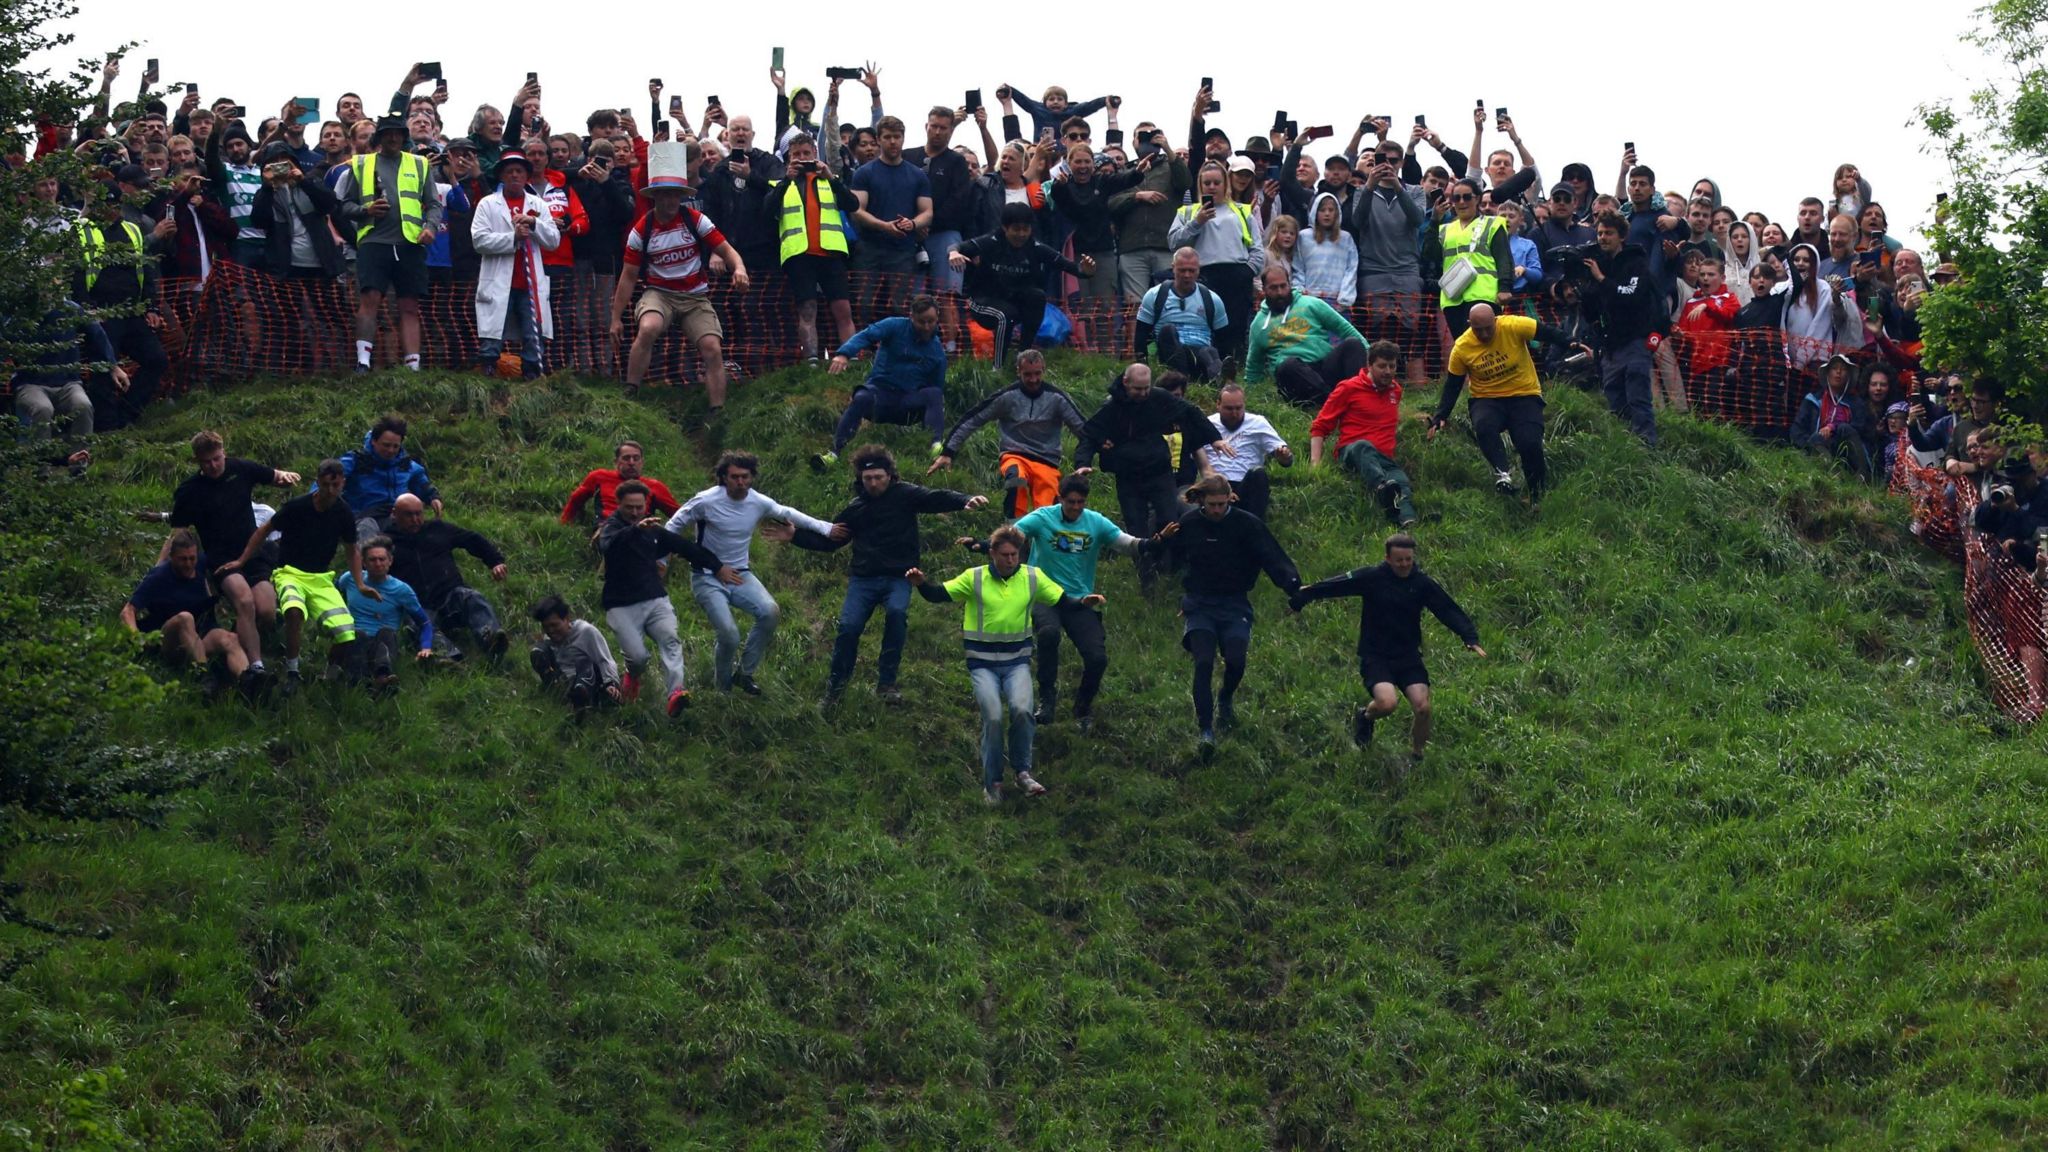 Crowds at the top of the hill as men run down